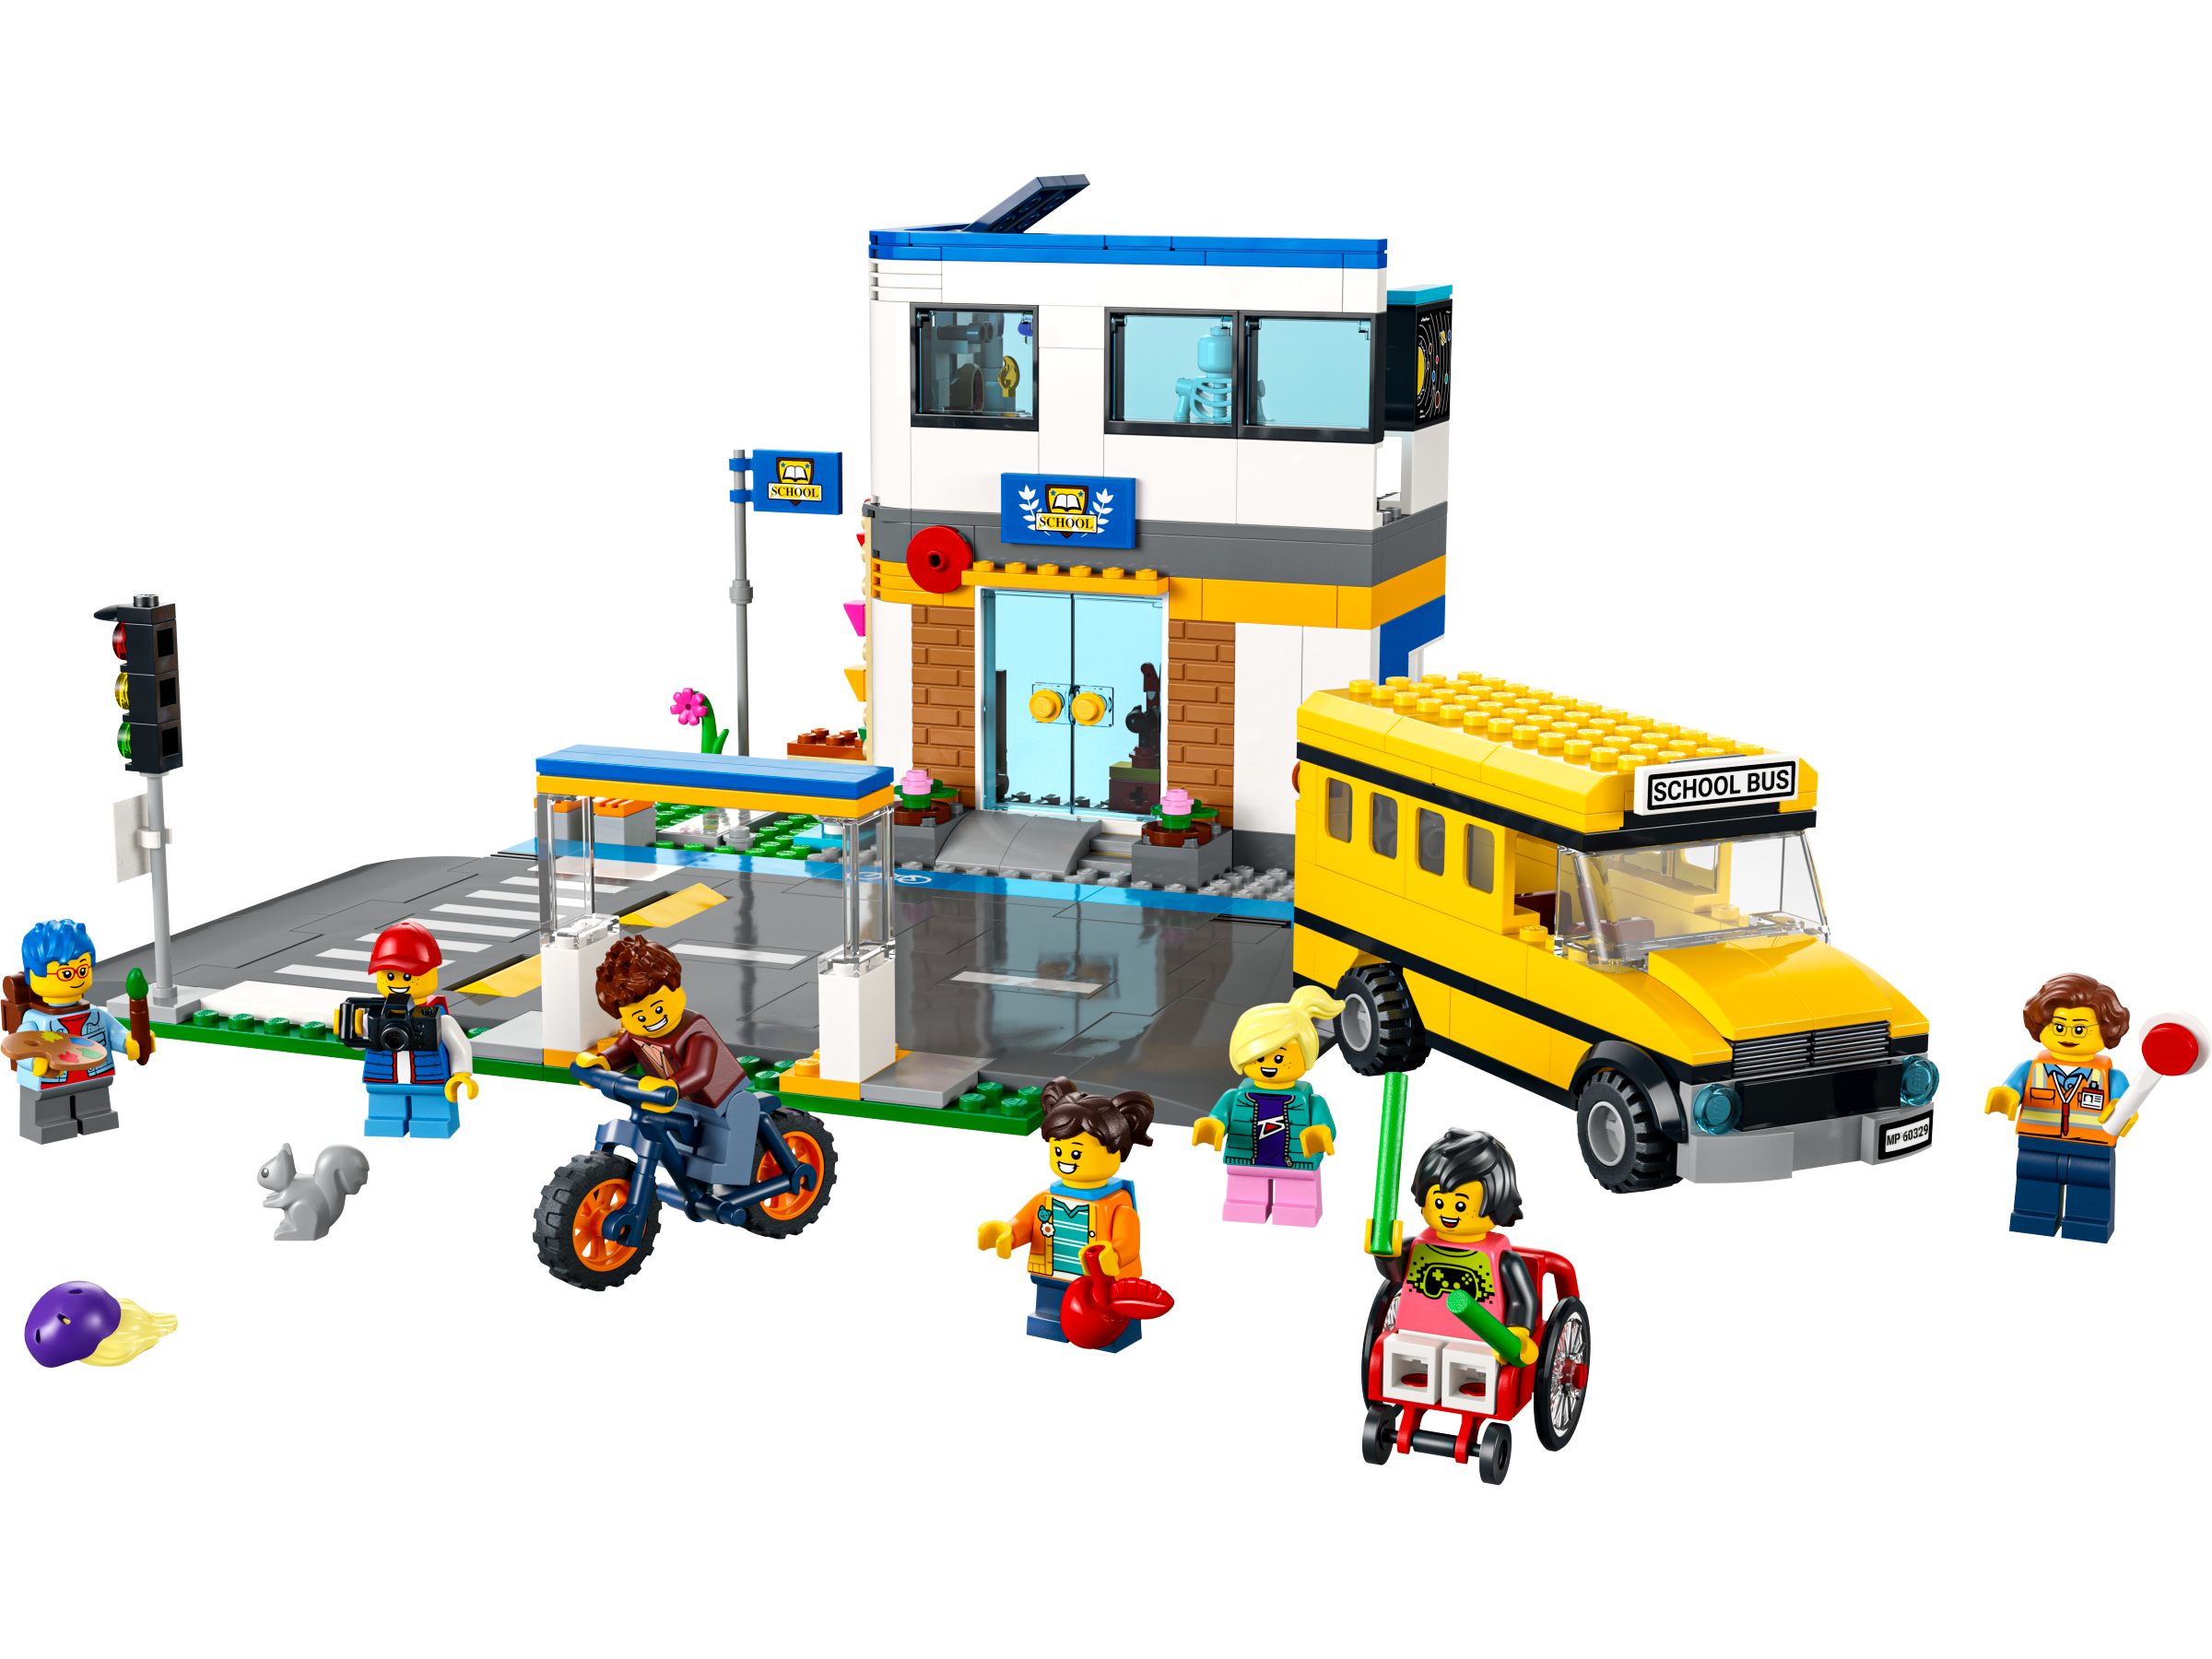 School Day 60329 | City | Buy Online At The Official Lego® Shop Us